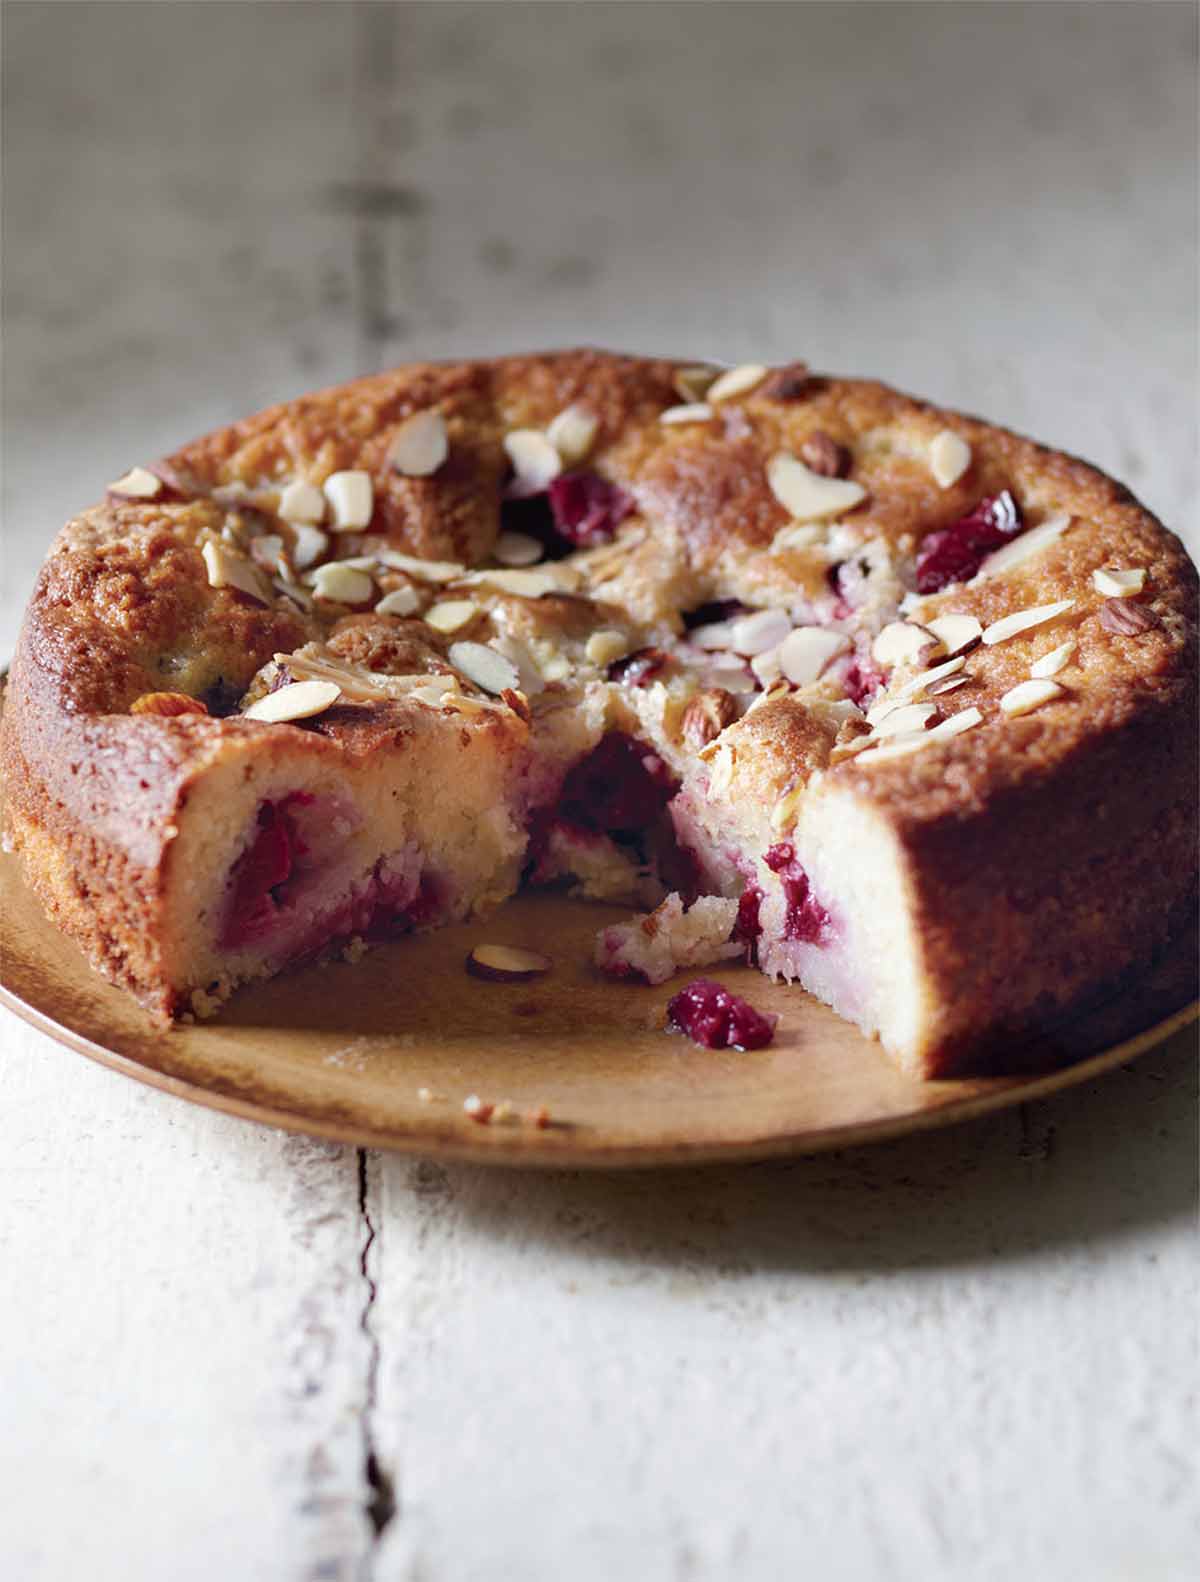 A whole plum almond cake on a plate with one wedge cut from it.